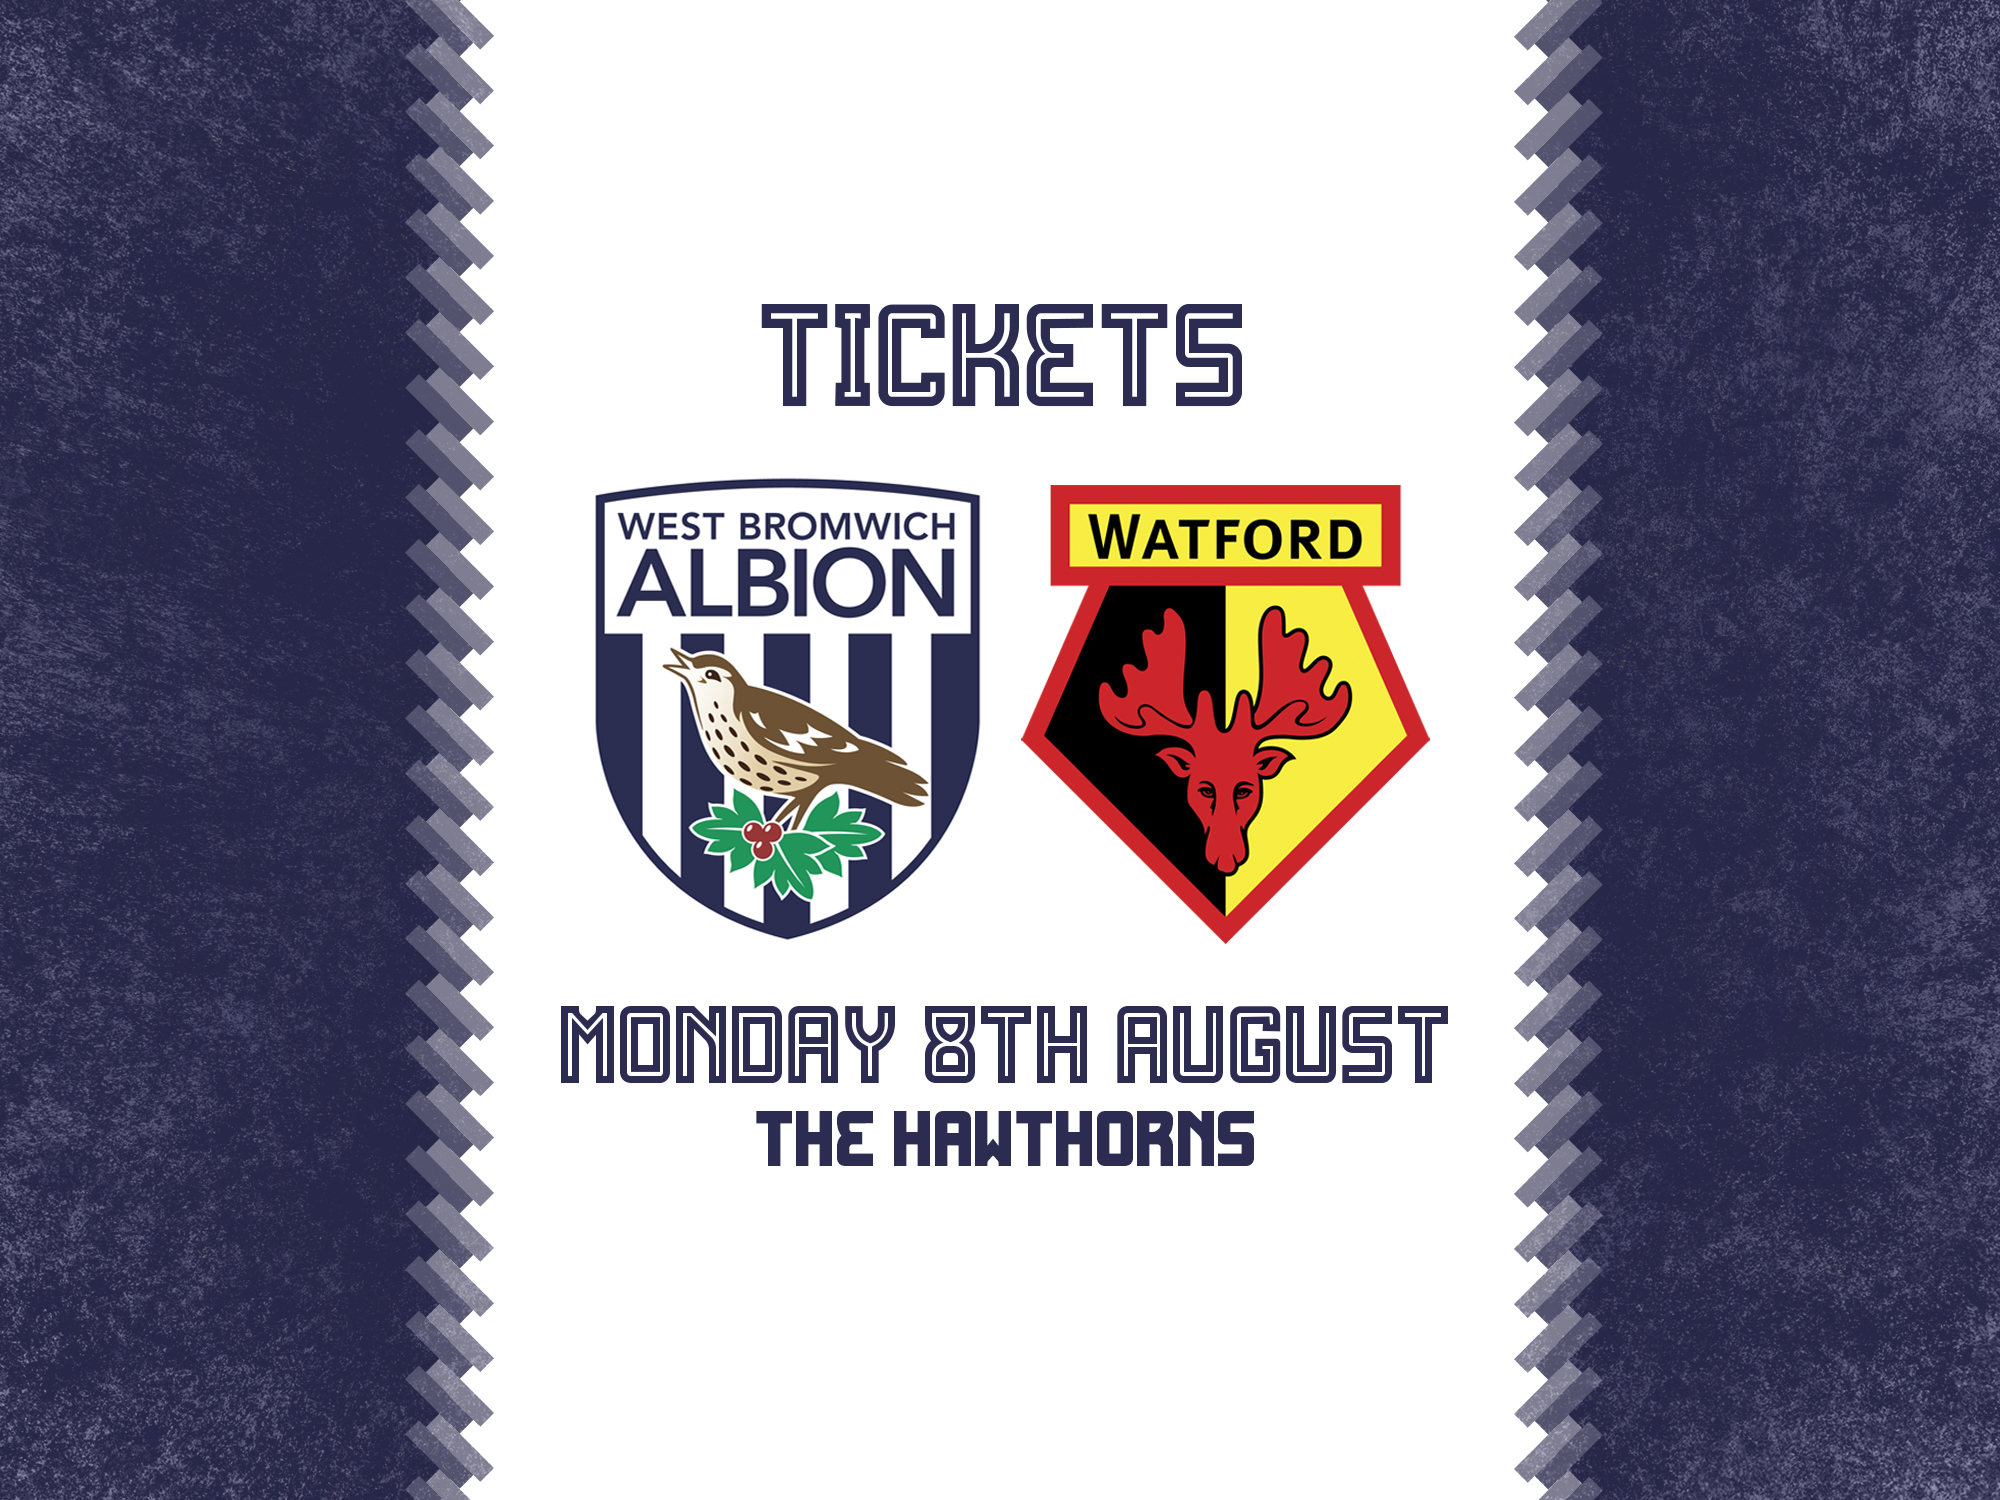 Tickets are on general sale for Albion's game against Watford